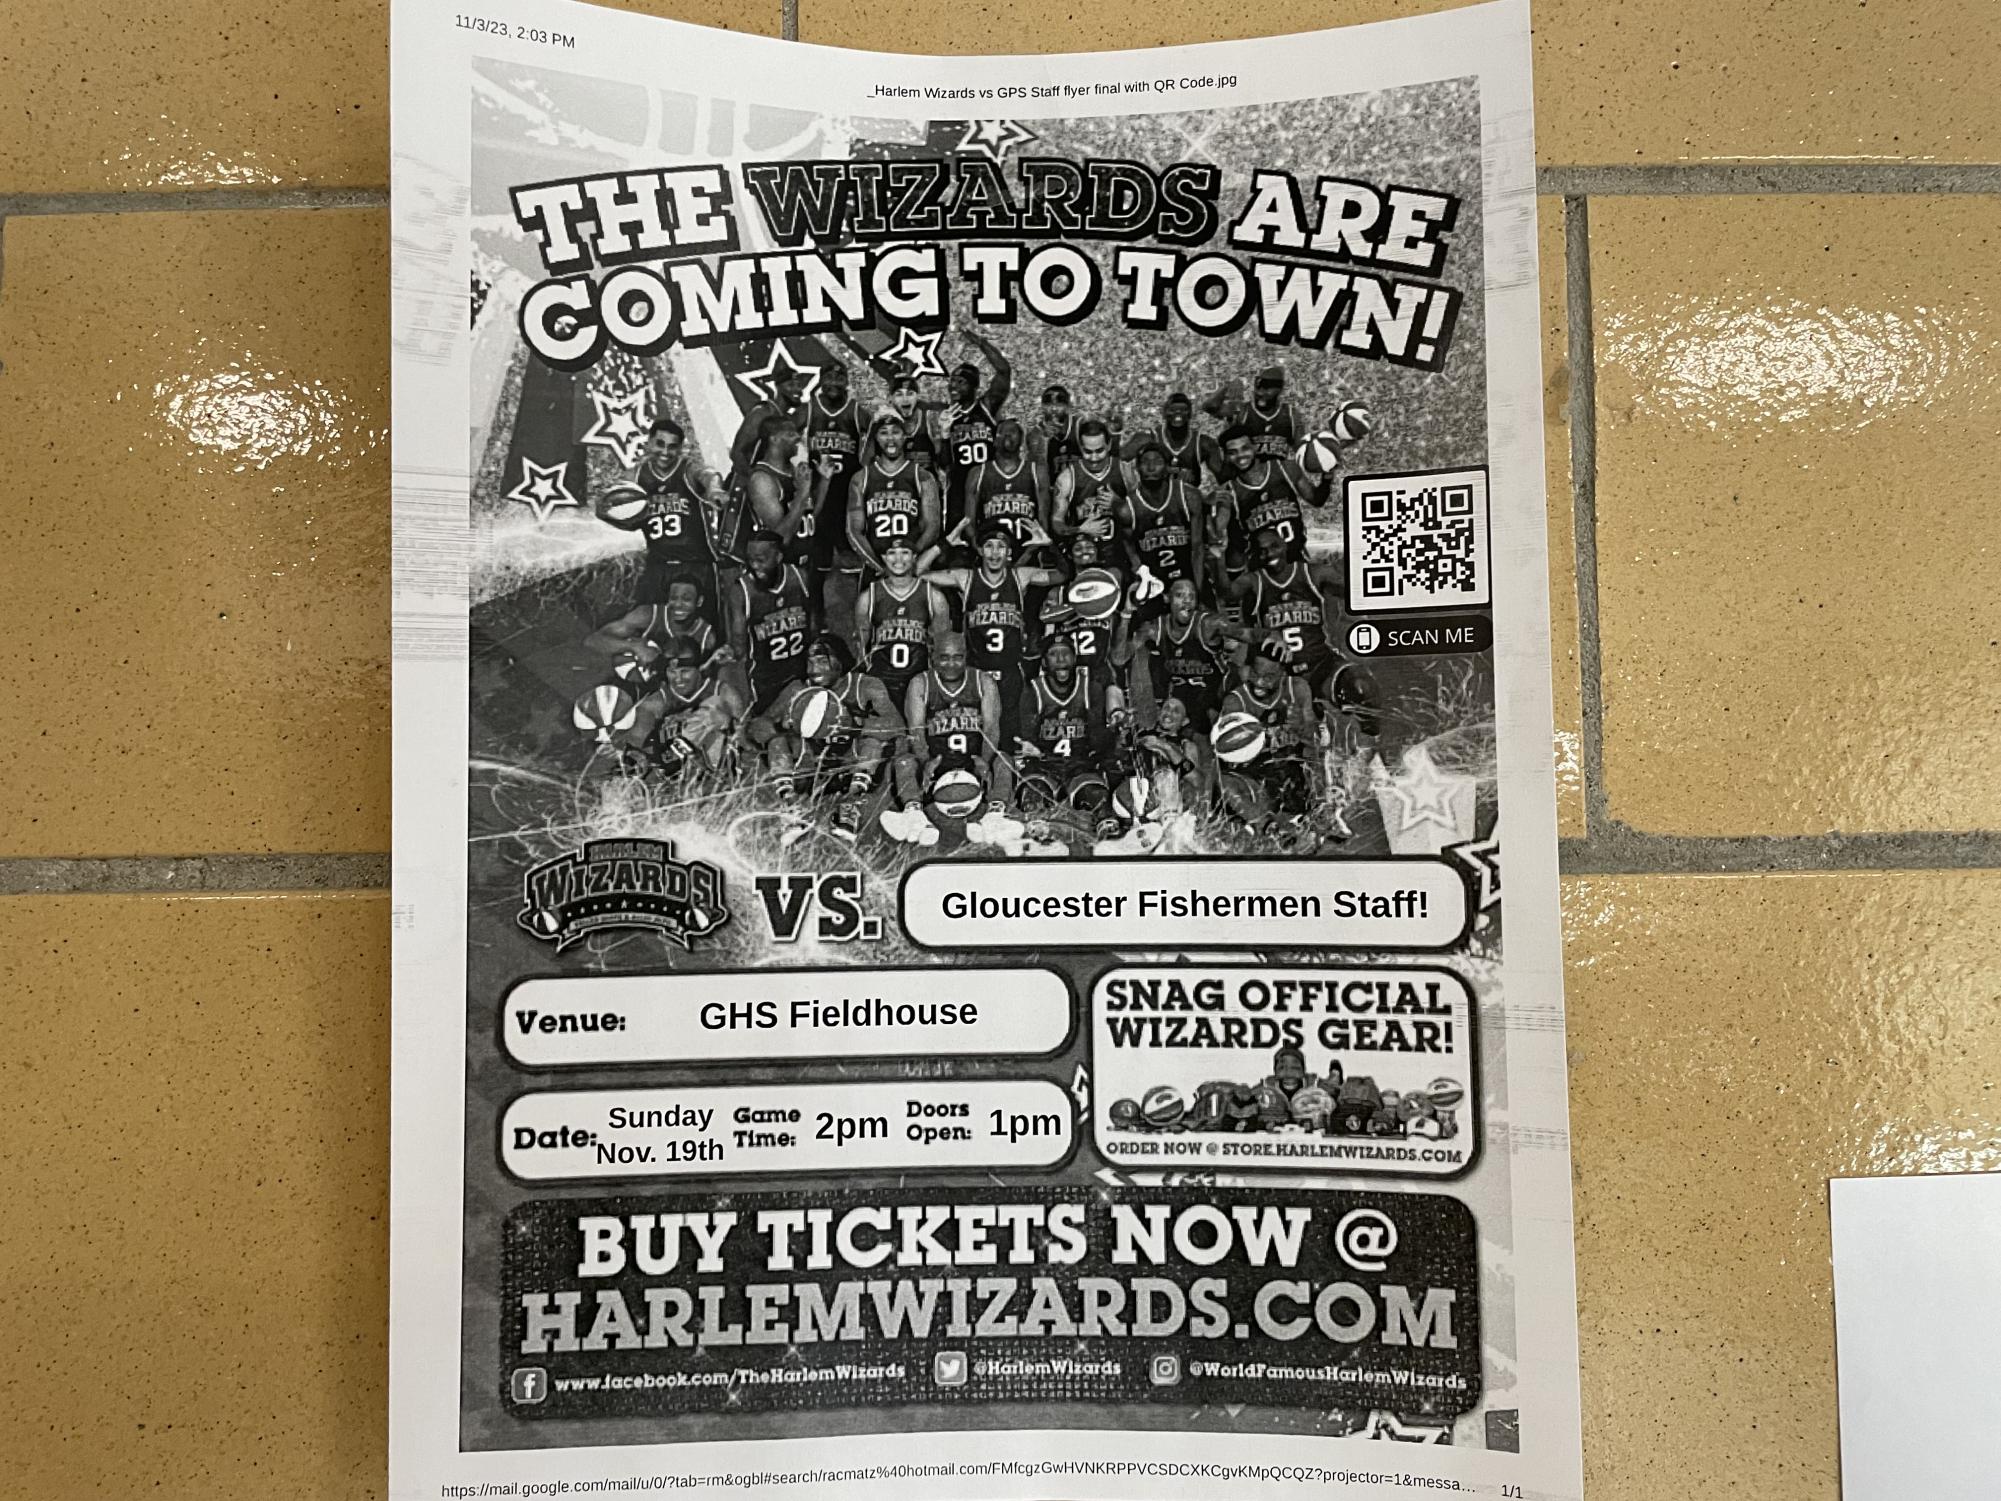 The Harlem Wizards come to GHS this weekend